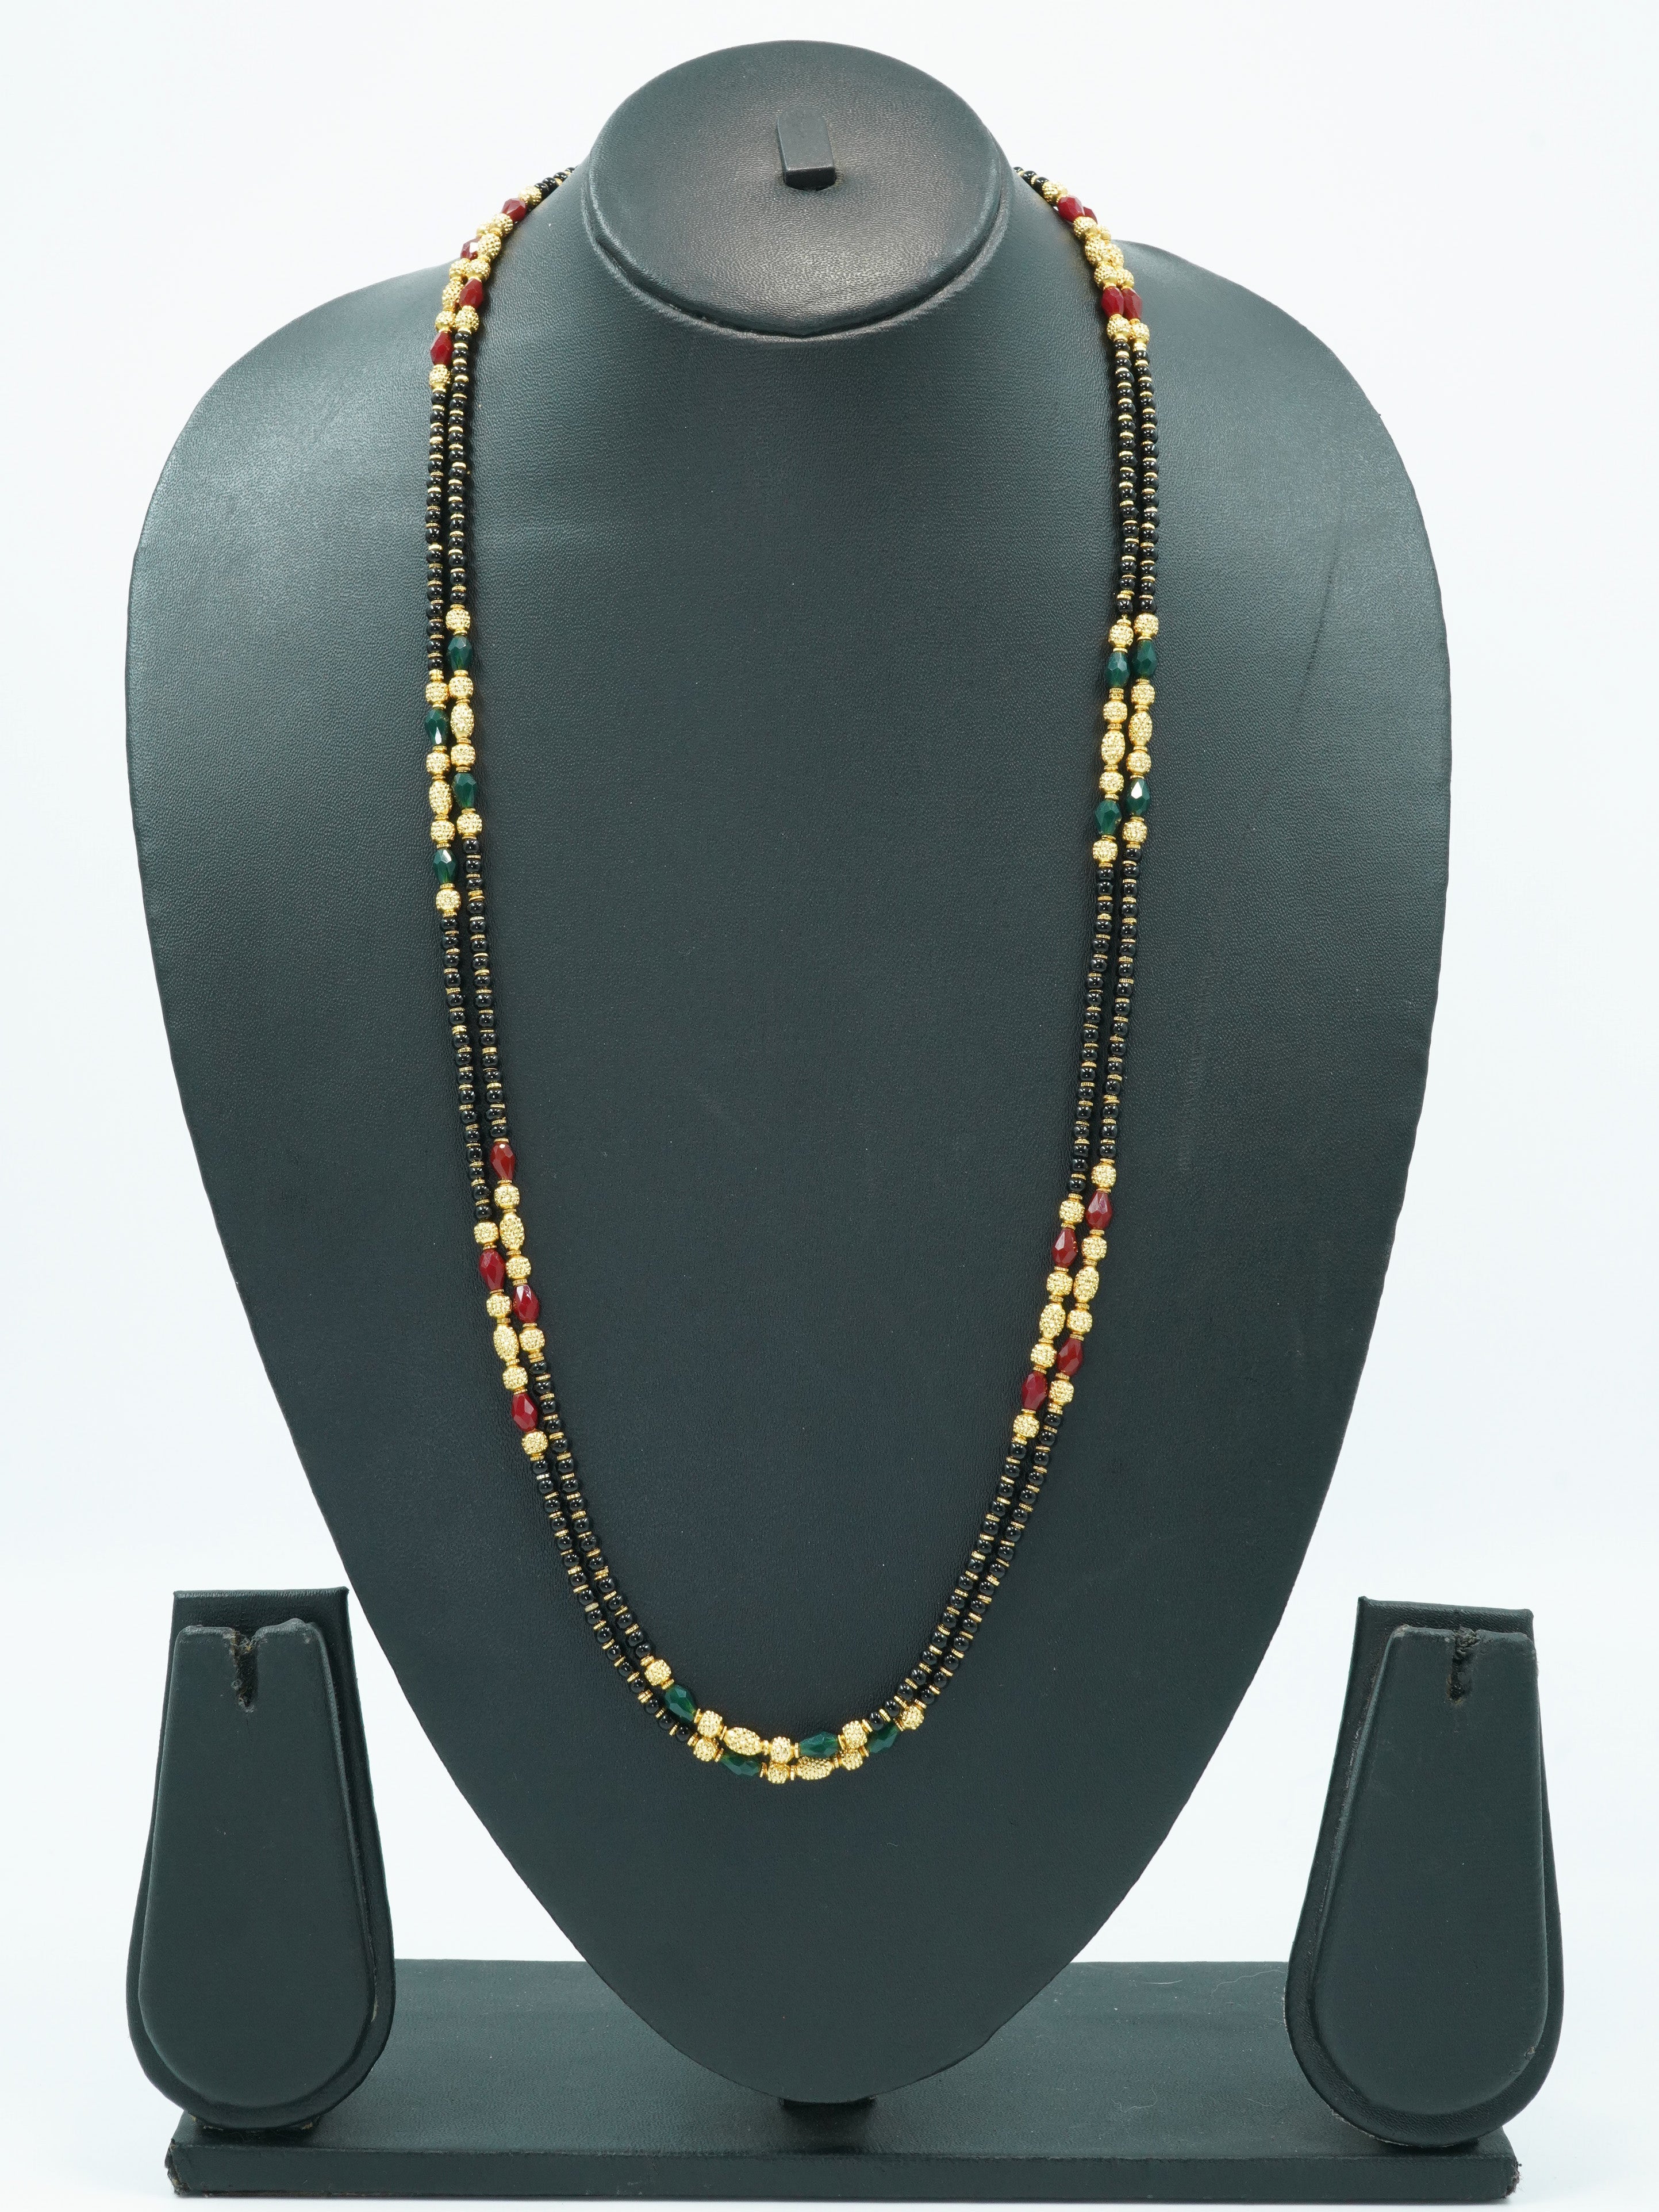 1 gm Micro gold plated 2 Line designer 30 inches chainwith black beads 10647N